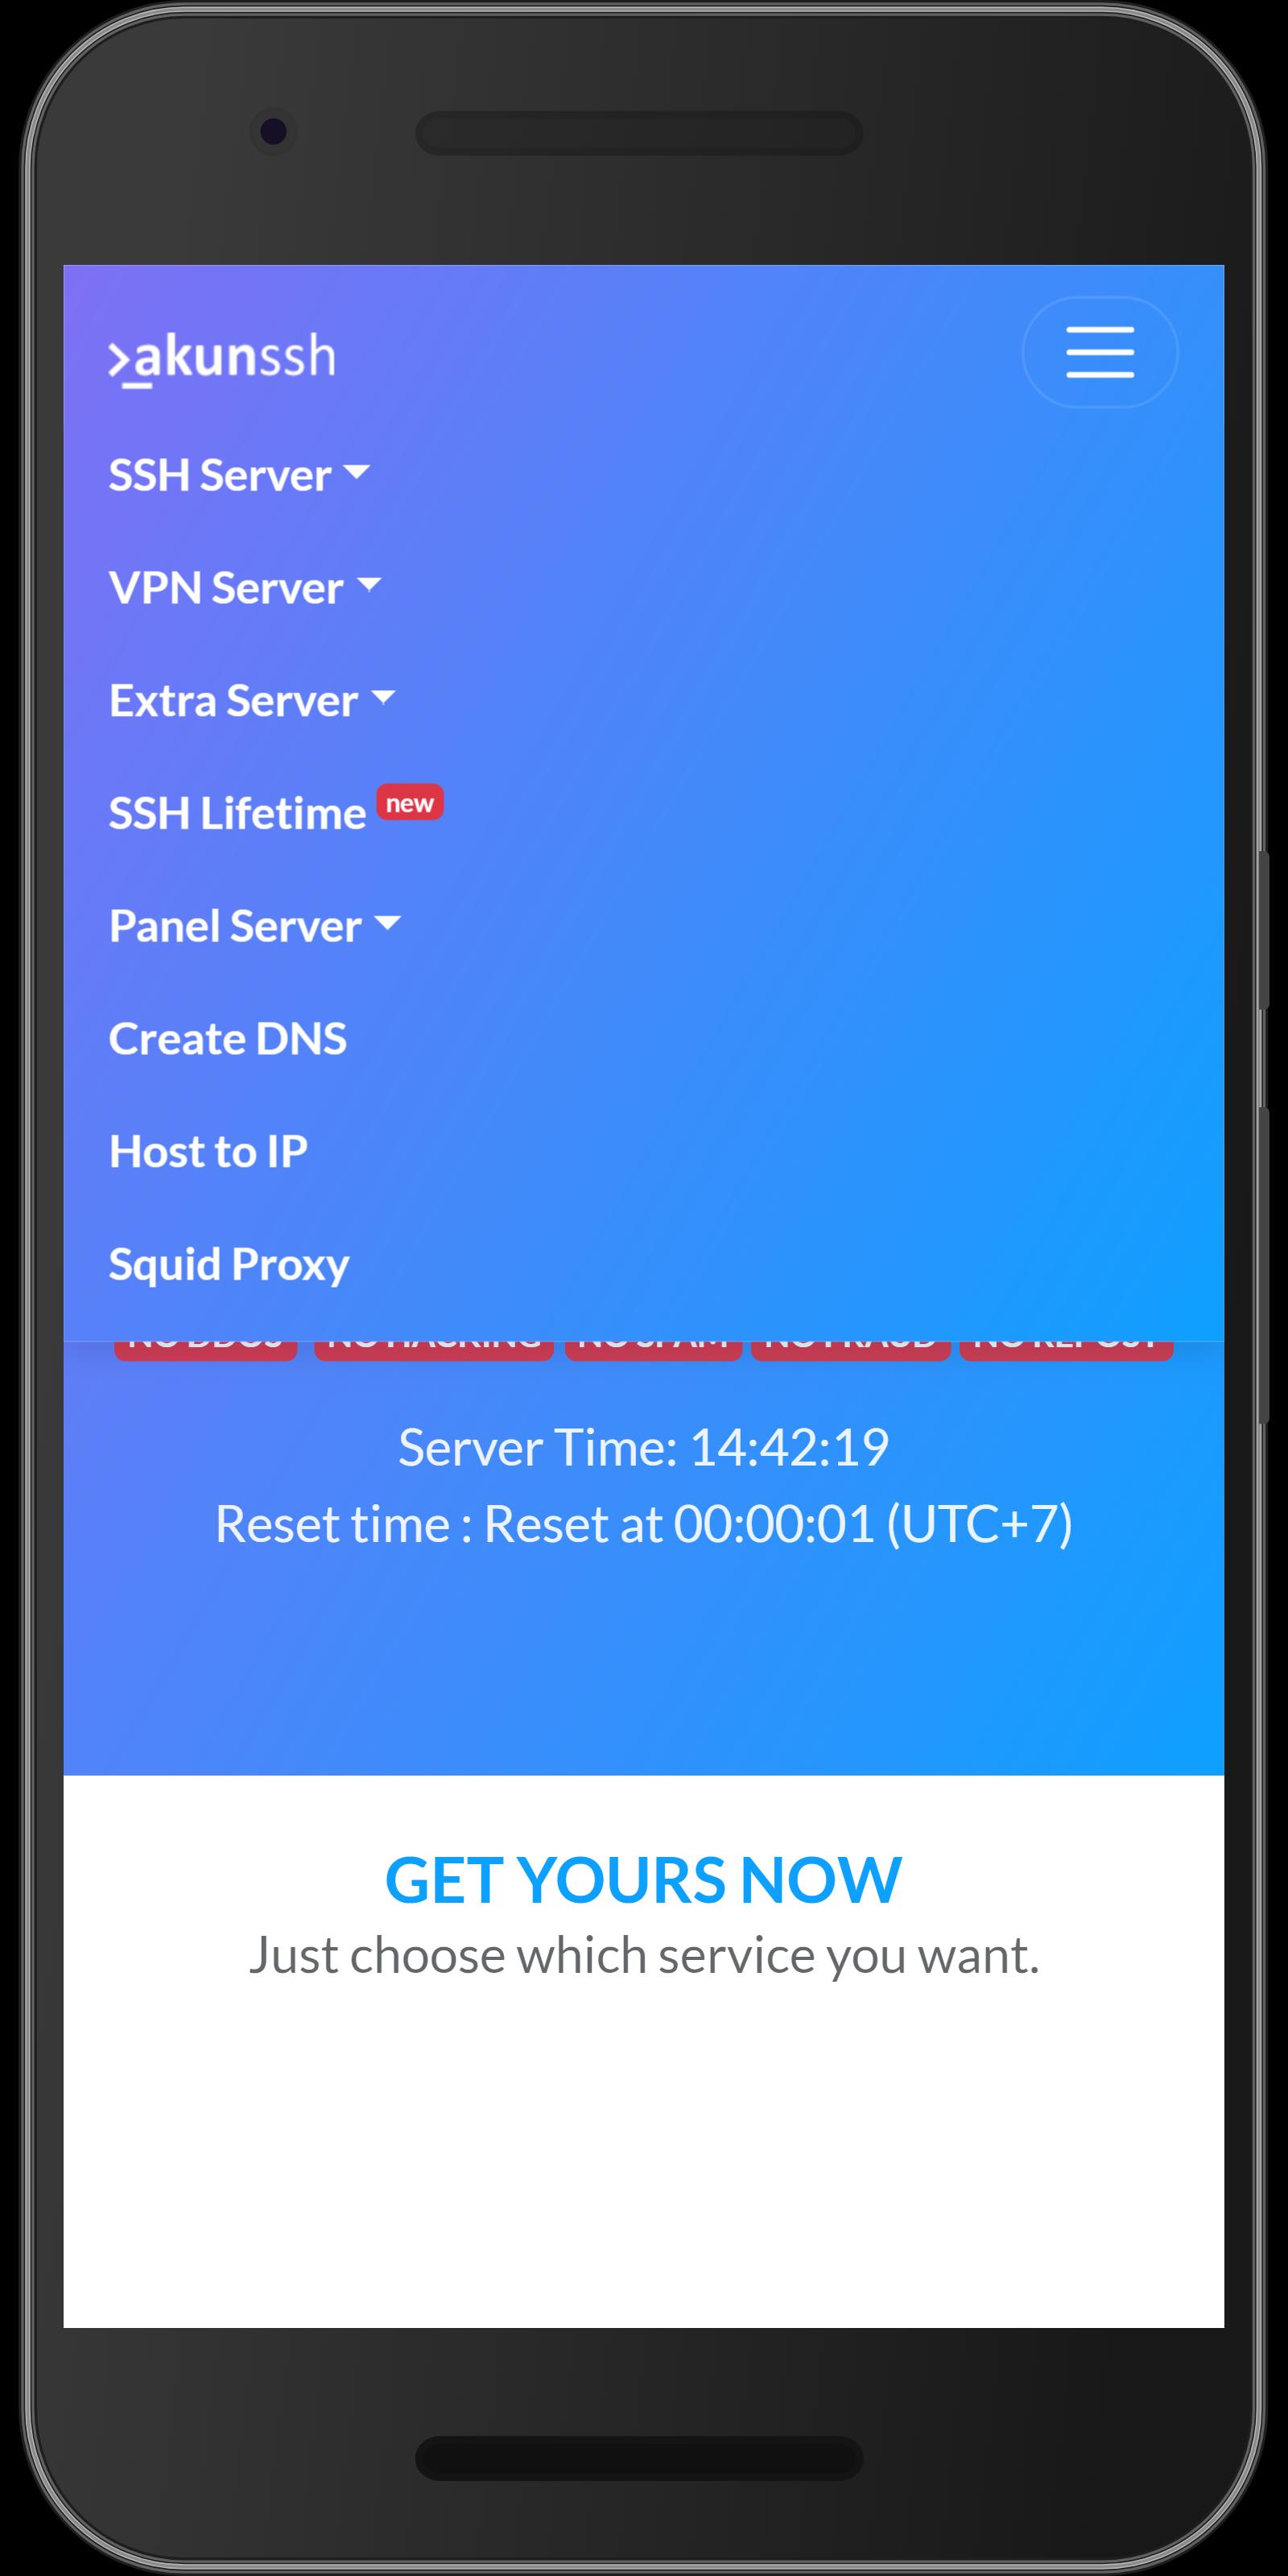 Akunssh Net For Android Apk Download